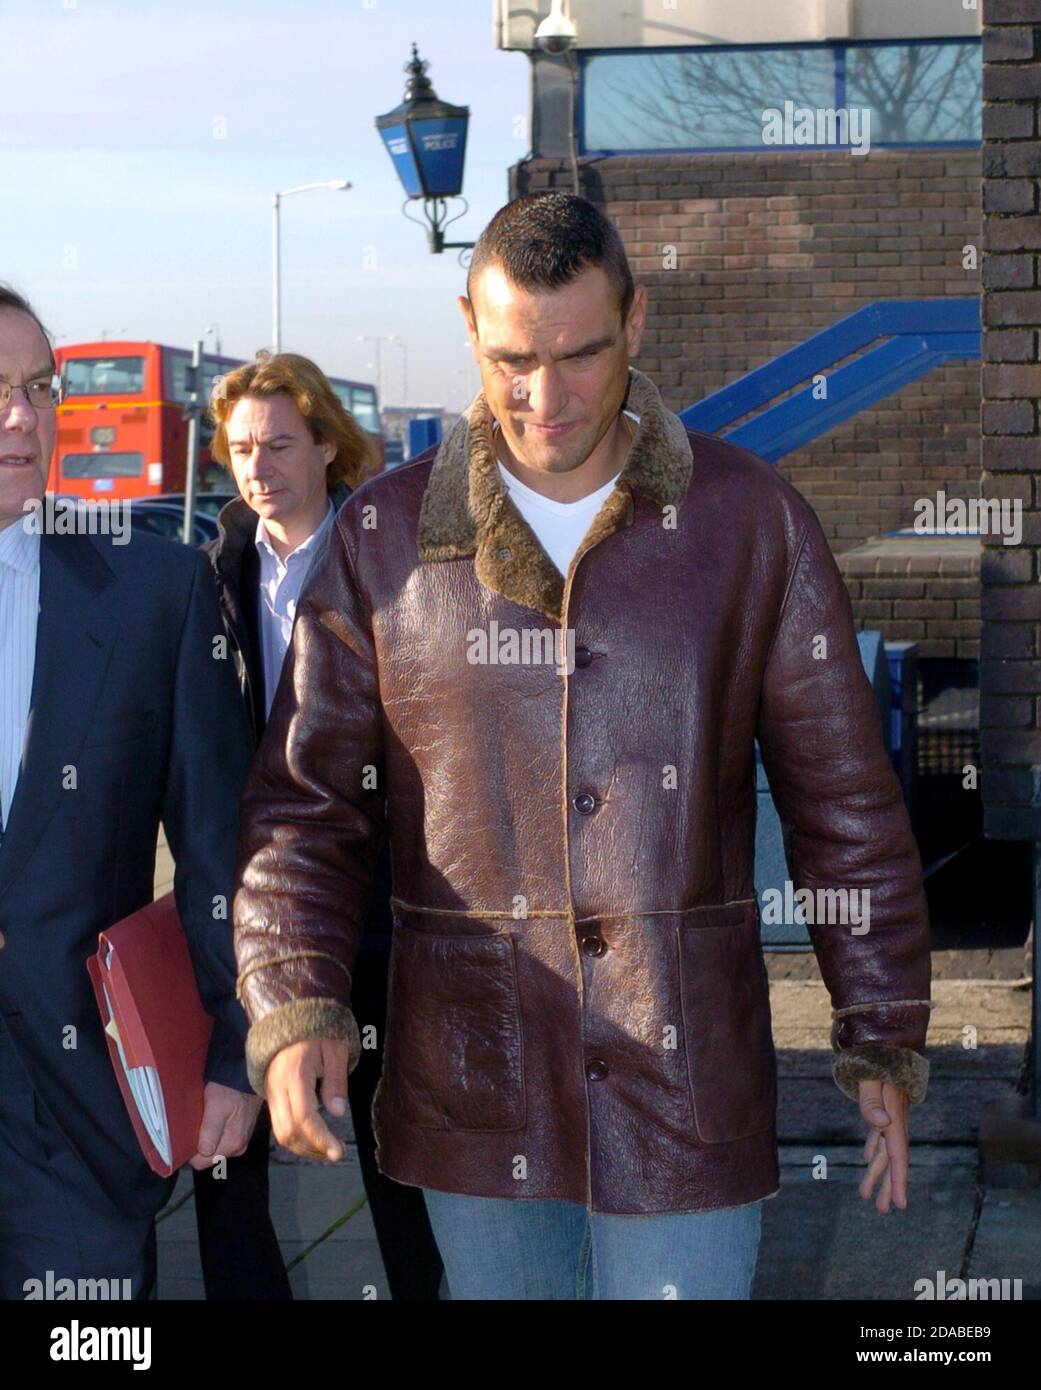 Actor and former footballer Vinnie Jones leaving Heathrow Police station in 2003 following an arrest for being drunk on an aircraft, using threatening abusive or insulting words, and common assault on a male passenger. Stock Photo